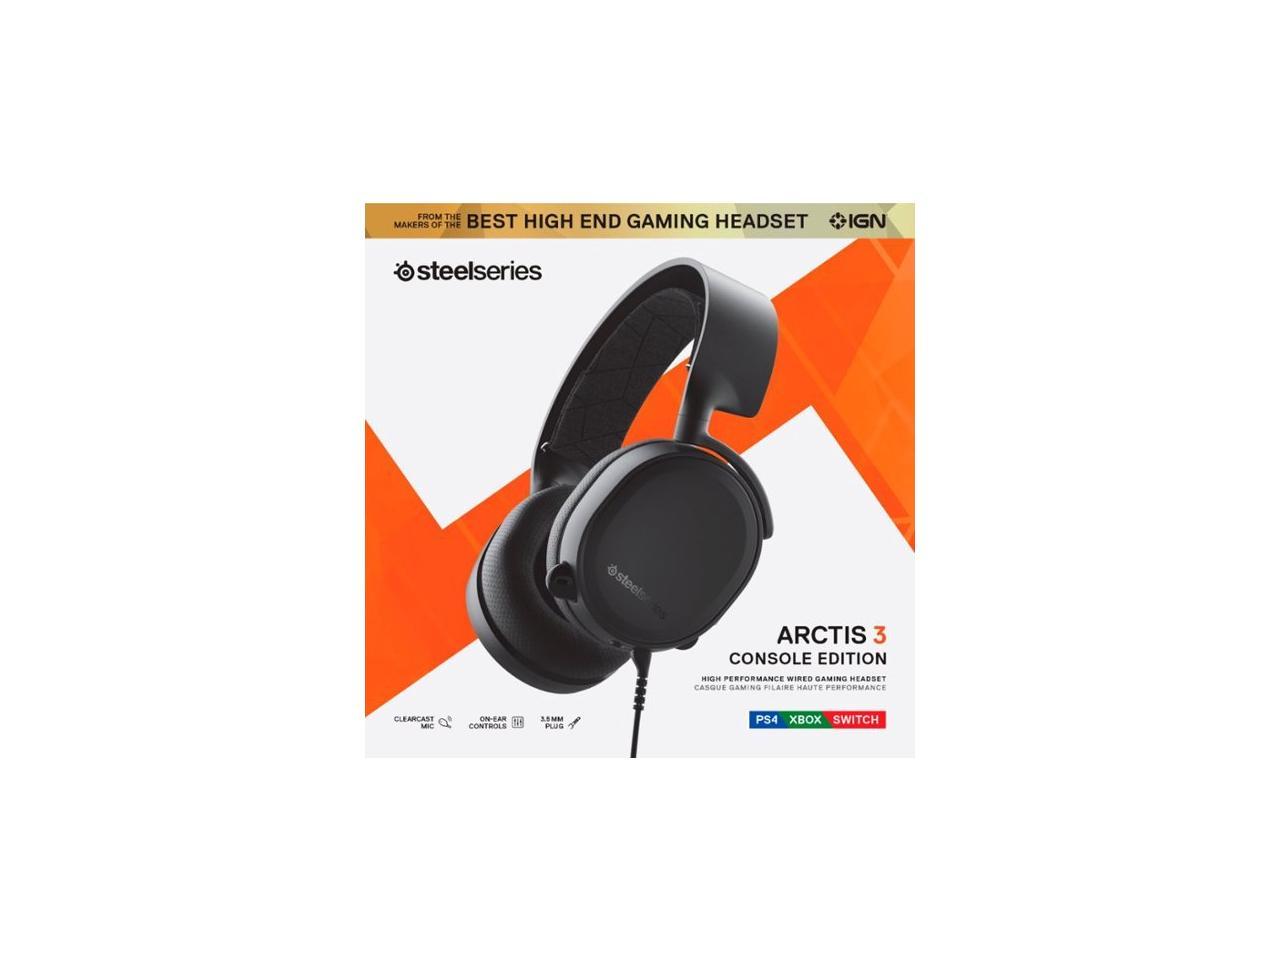 ga winkelen Berekening Televisie kijken New! SteelSeries Arctis 3 Console Wired Stereo Gaming Headset 2019 Edition  (Black) for PC, PlayStation 4, Xbox One, Nintendo Switch, VR, Android, and  iOS - Black - Newegg.com